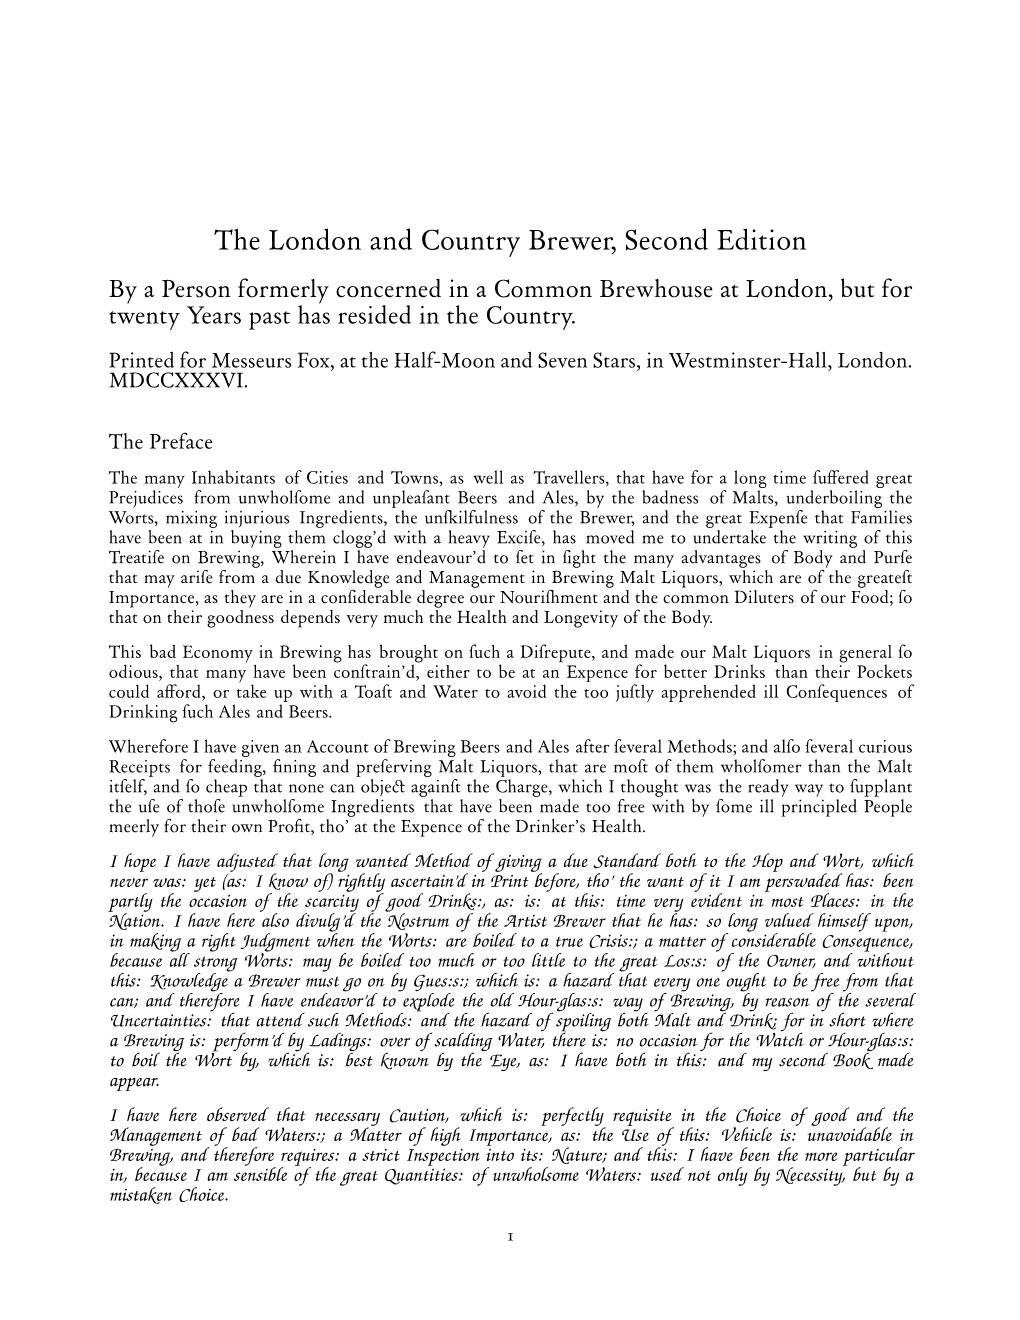 The London and Country Brewer, Second Edition